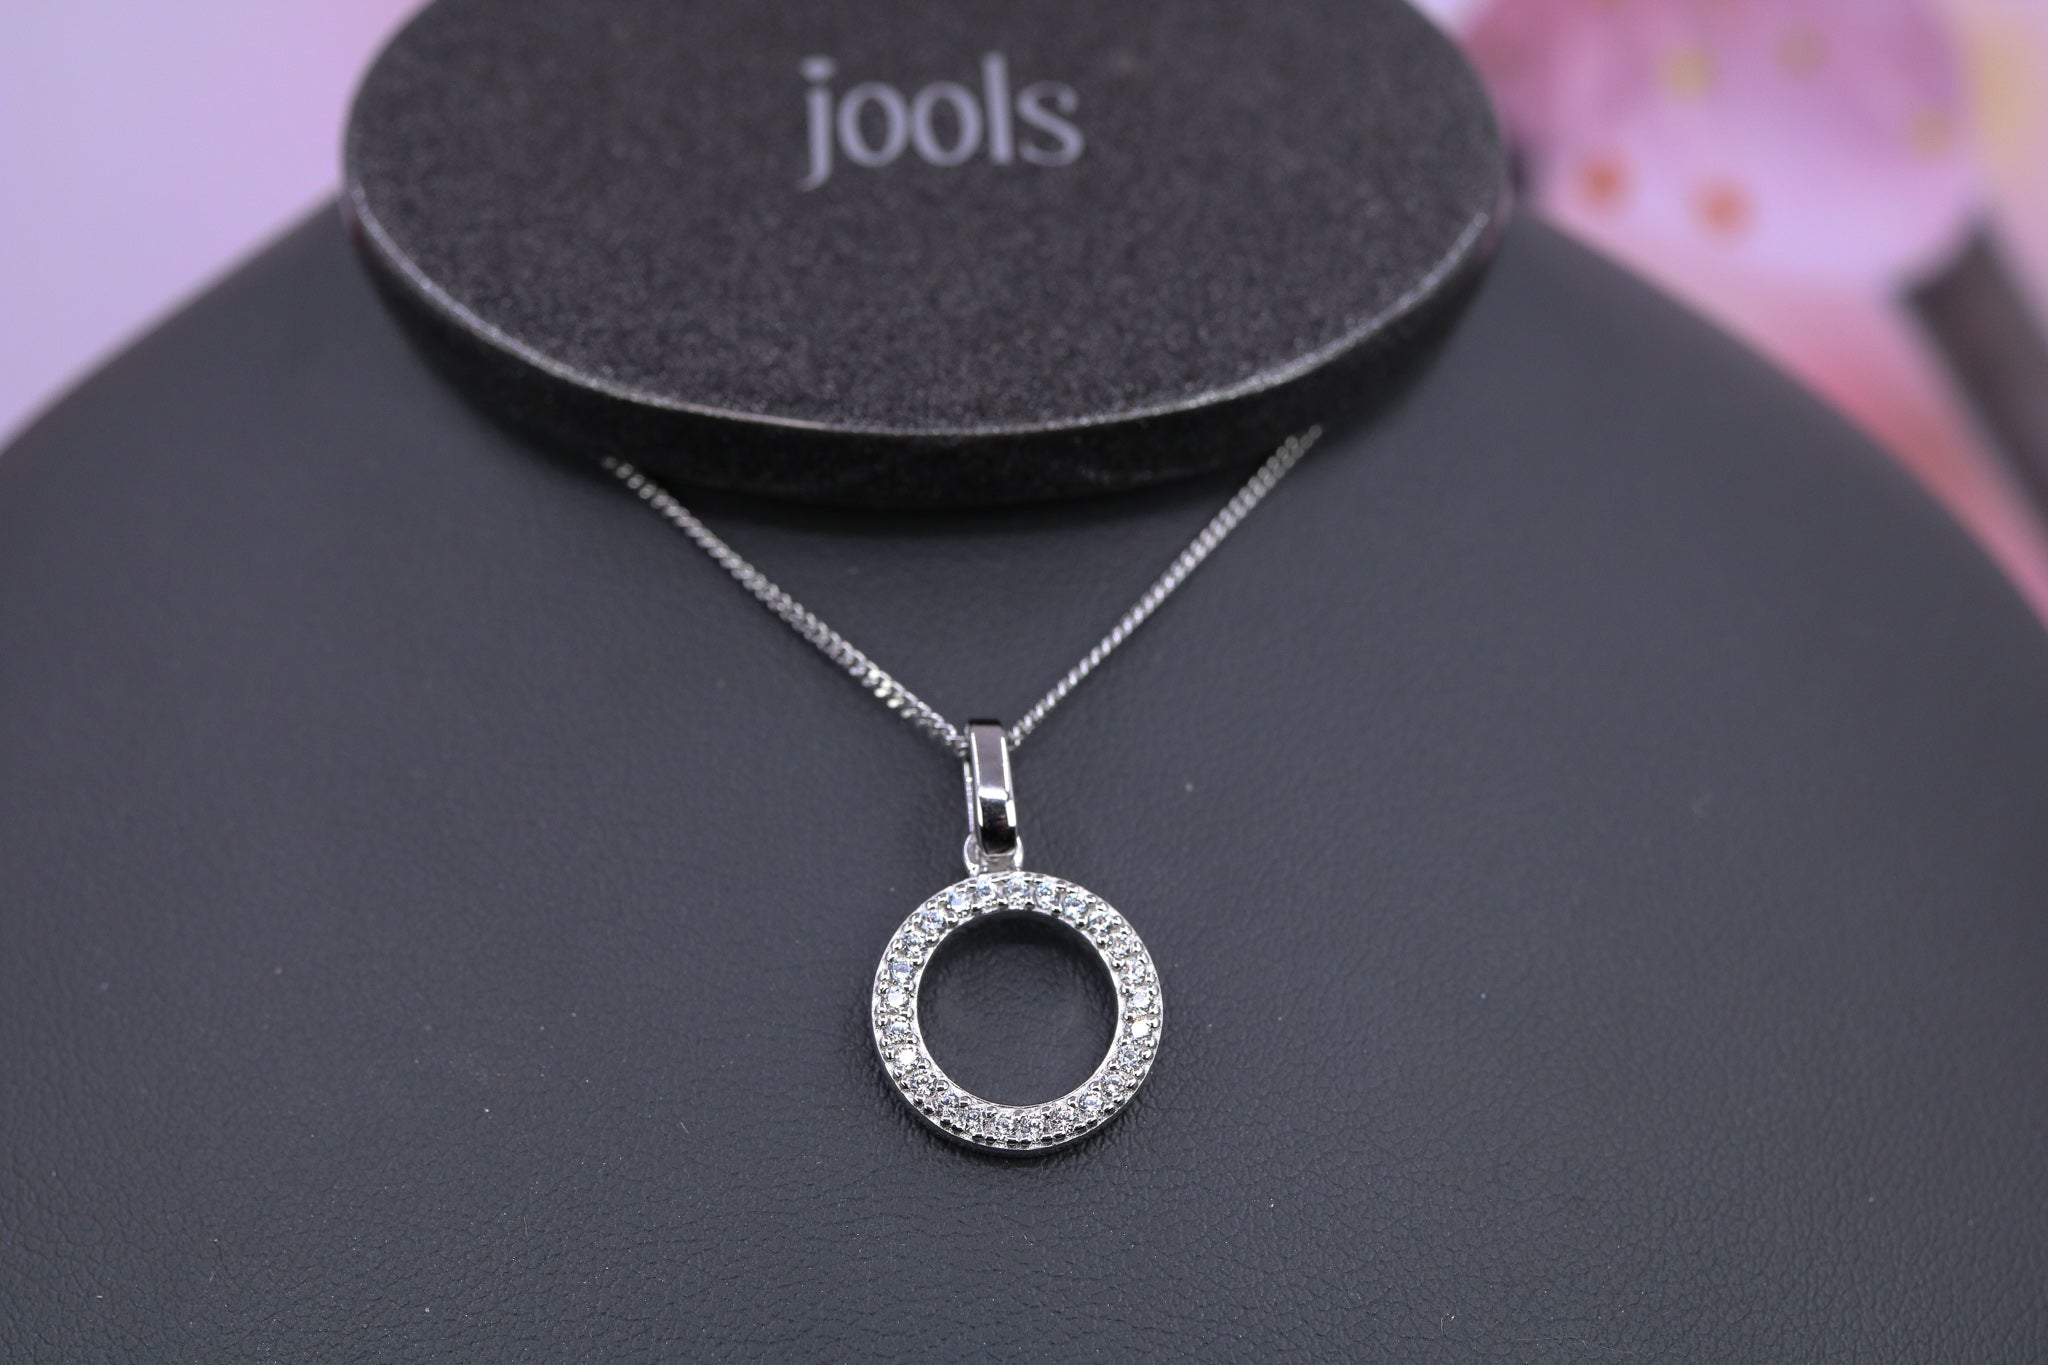 Jools Sterling Silver Pendant & Chain - JL1010 - Hallmark Jewellers Formby & The Jewellers Bench Widnes